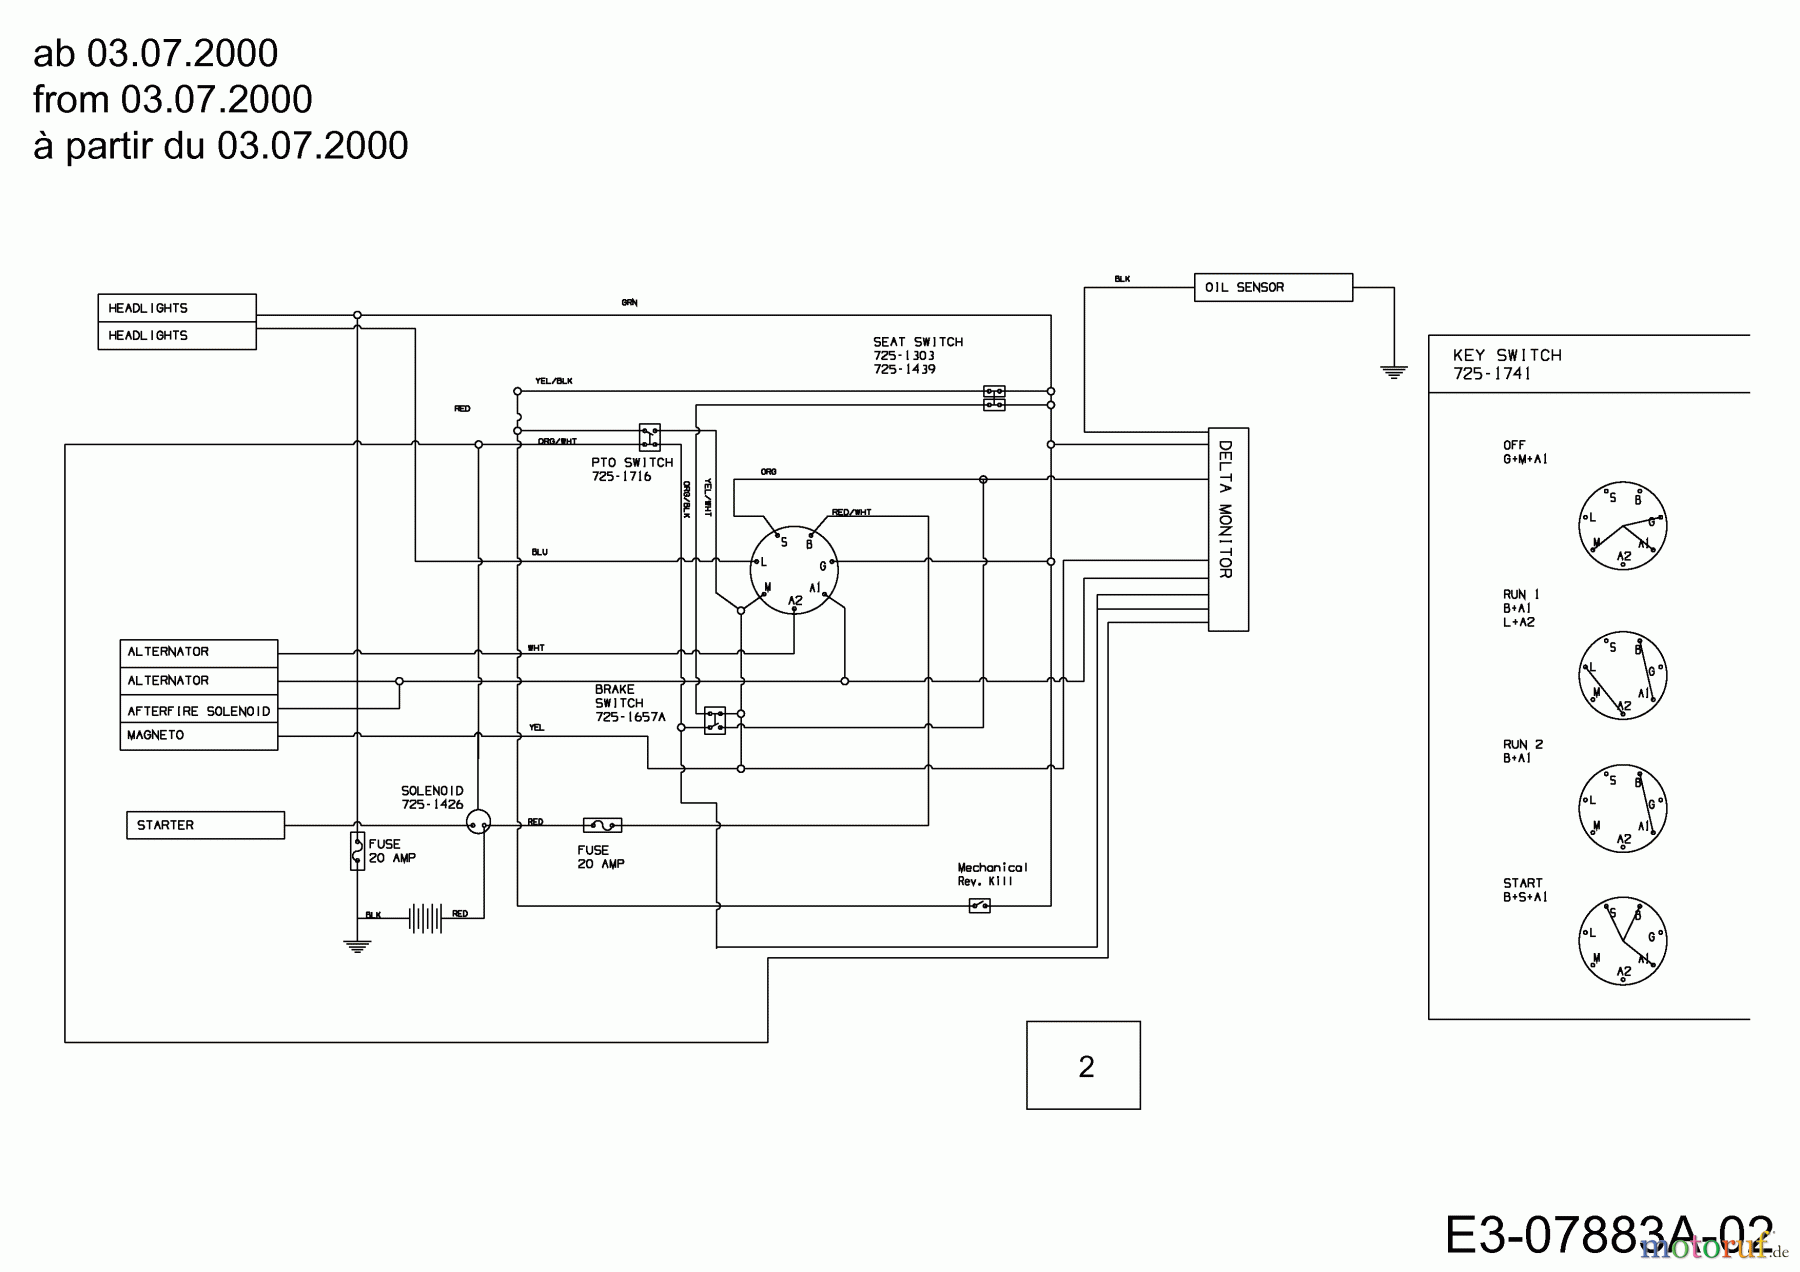  Gutbrod Lawn tractors Sprint SLX 107 S 13AP606G690  (2000) Wiring diagram from 03.07.2000